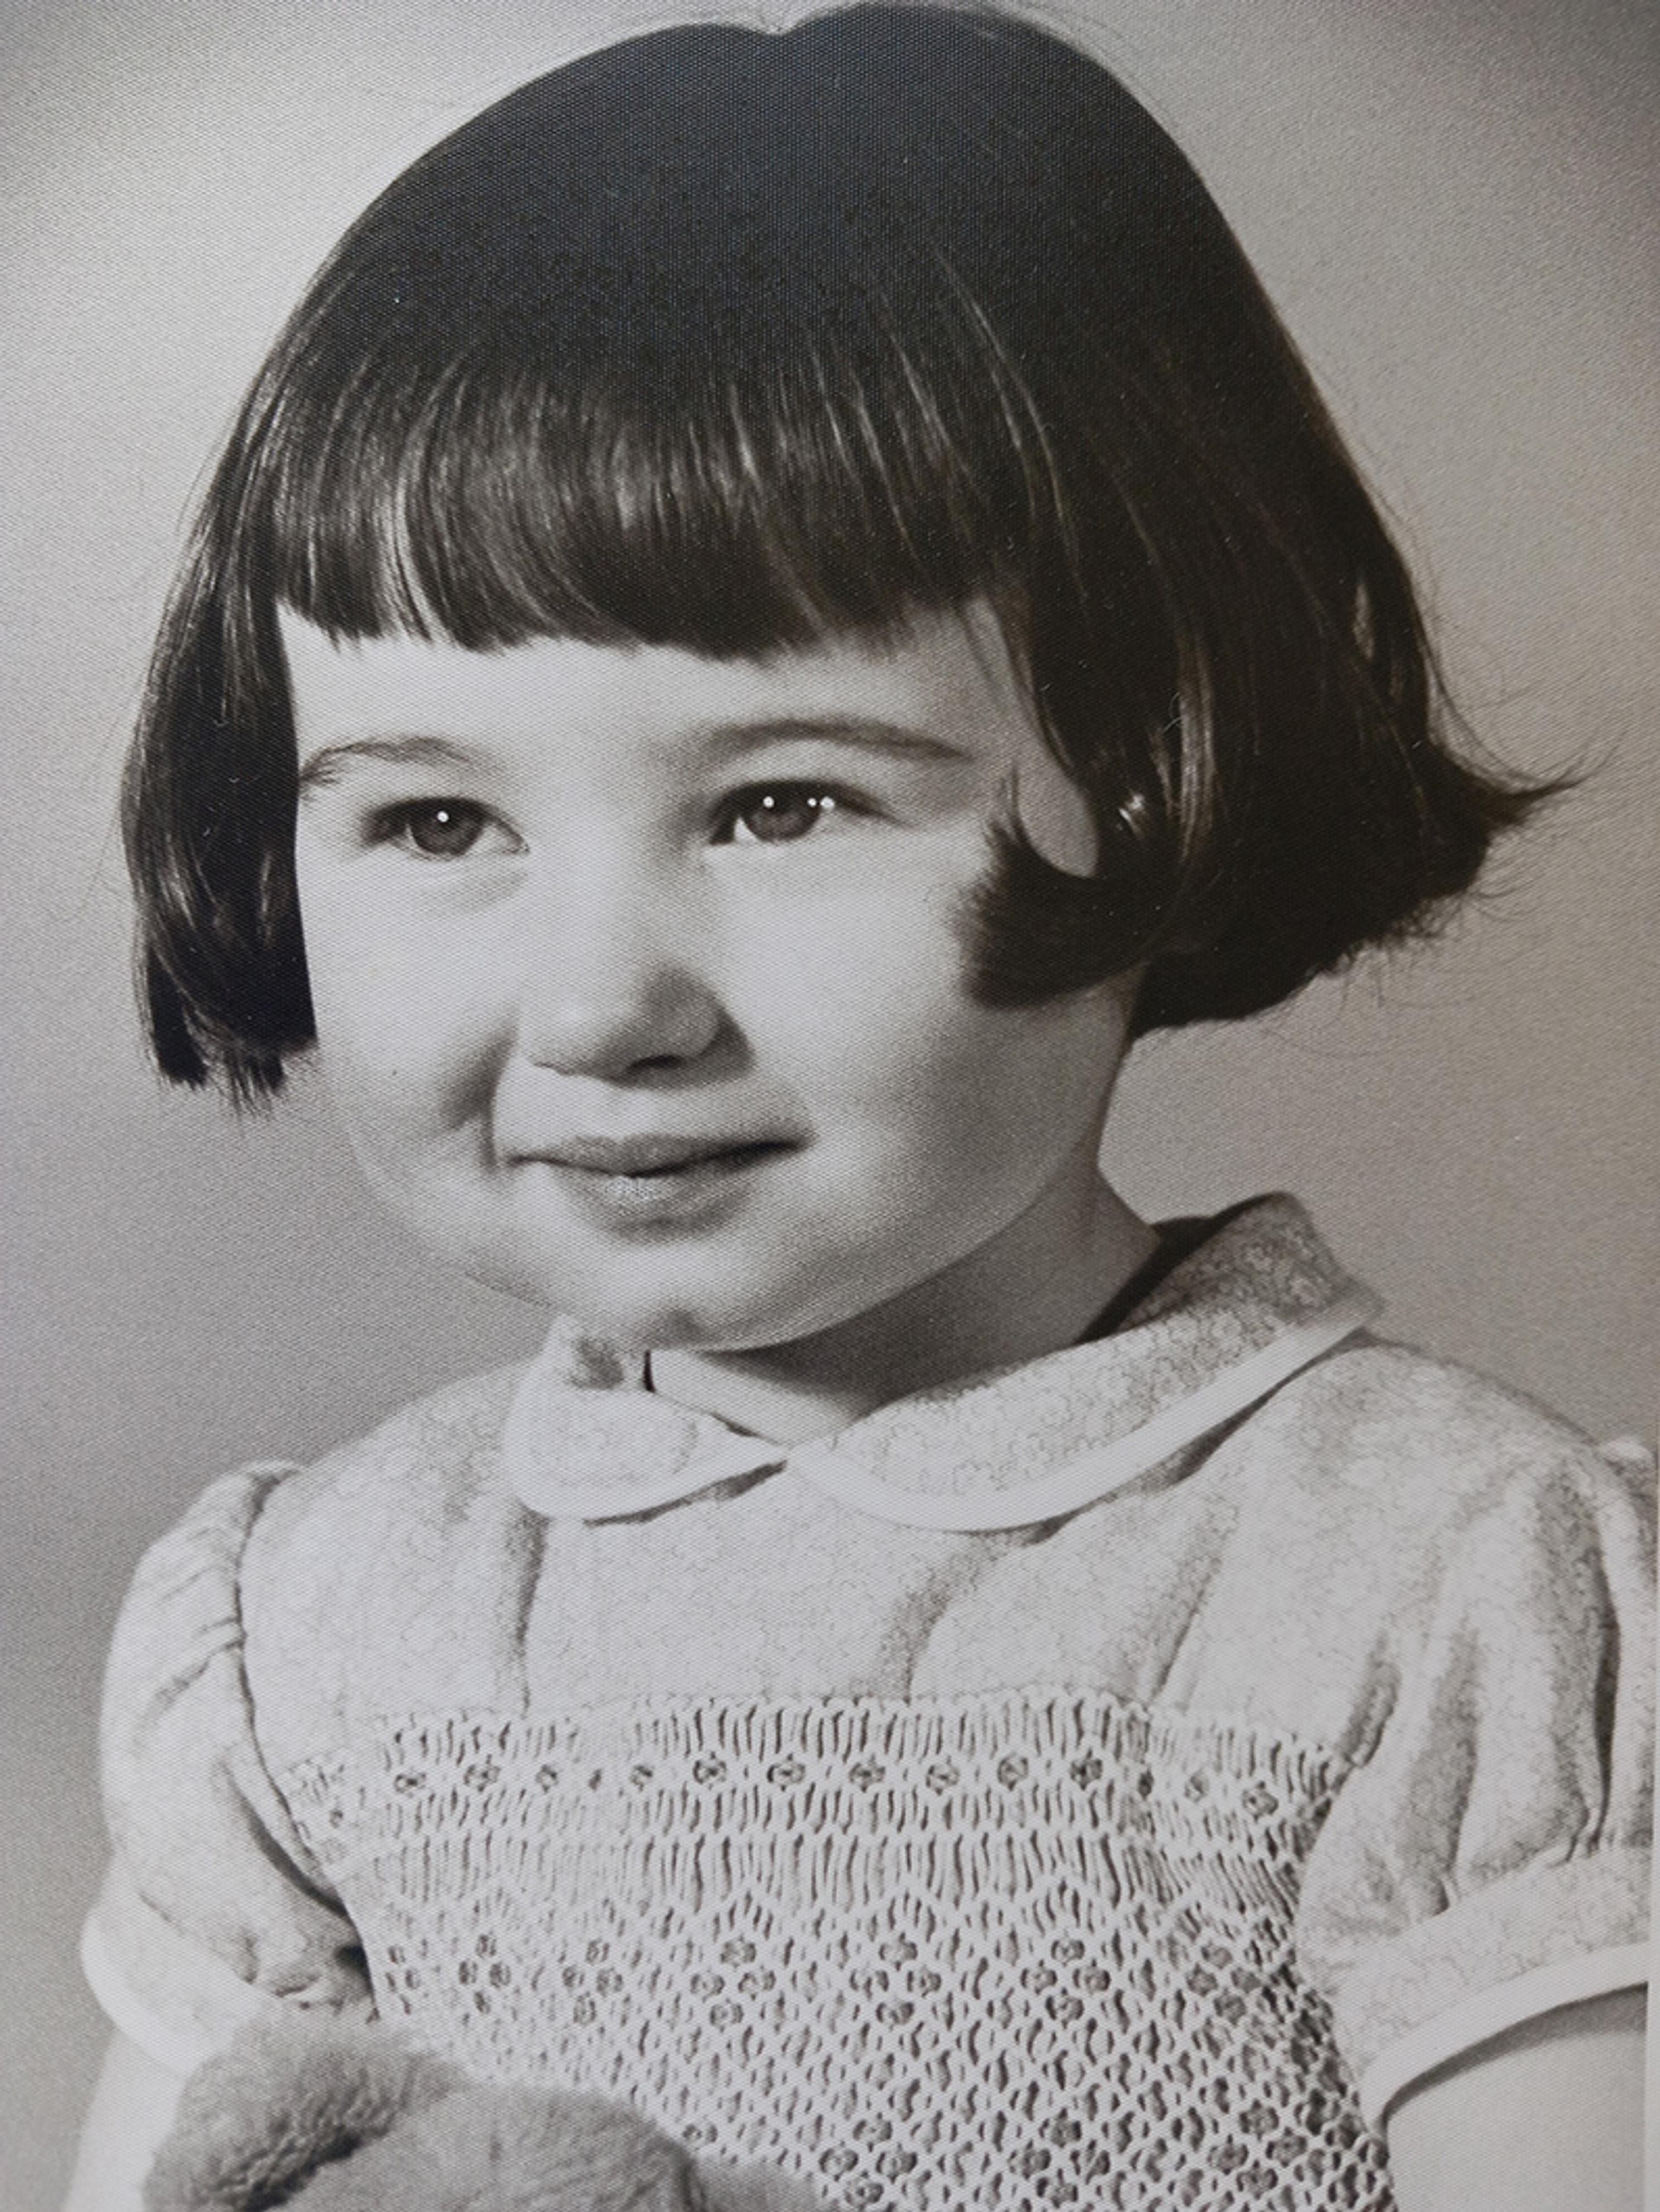 Black-and-white portrait of a young girl with short dark hair and a fringe, wearing a collared dress, holding a soft toy.